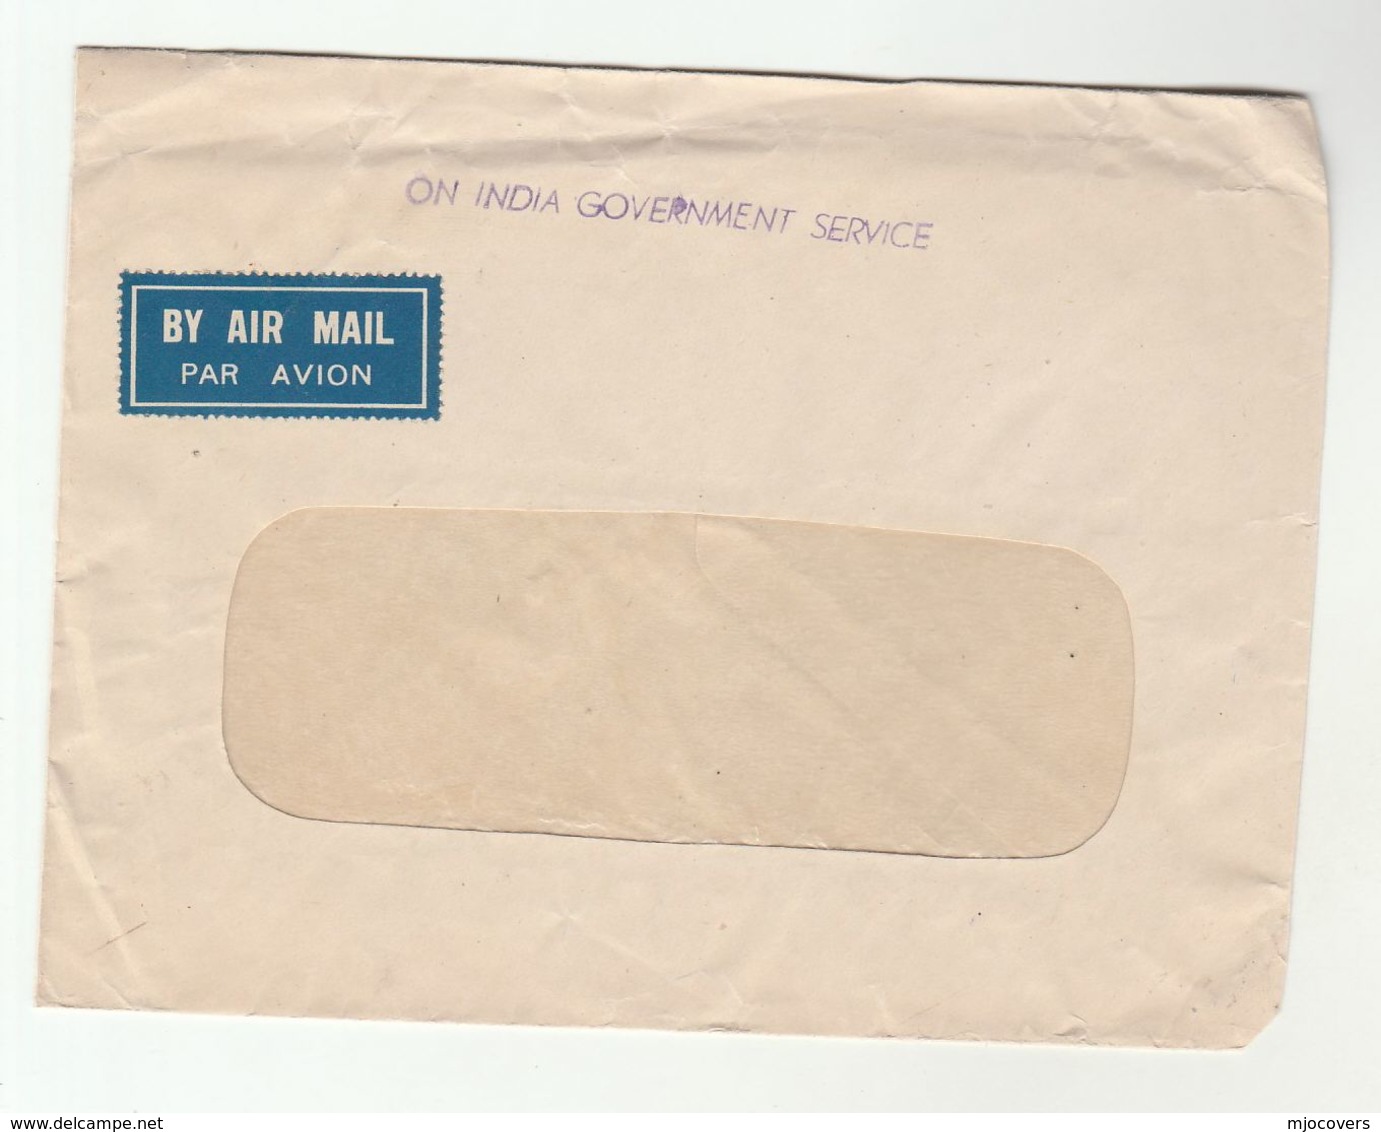 1956 INDIA COVER Pmk 'BARODA RESIDENCY'  On GOVT SERVICE From UNIVERSITY OF BARODA Stamps Airmail Label - Covers & Documents